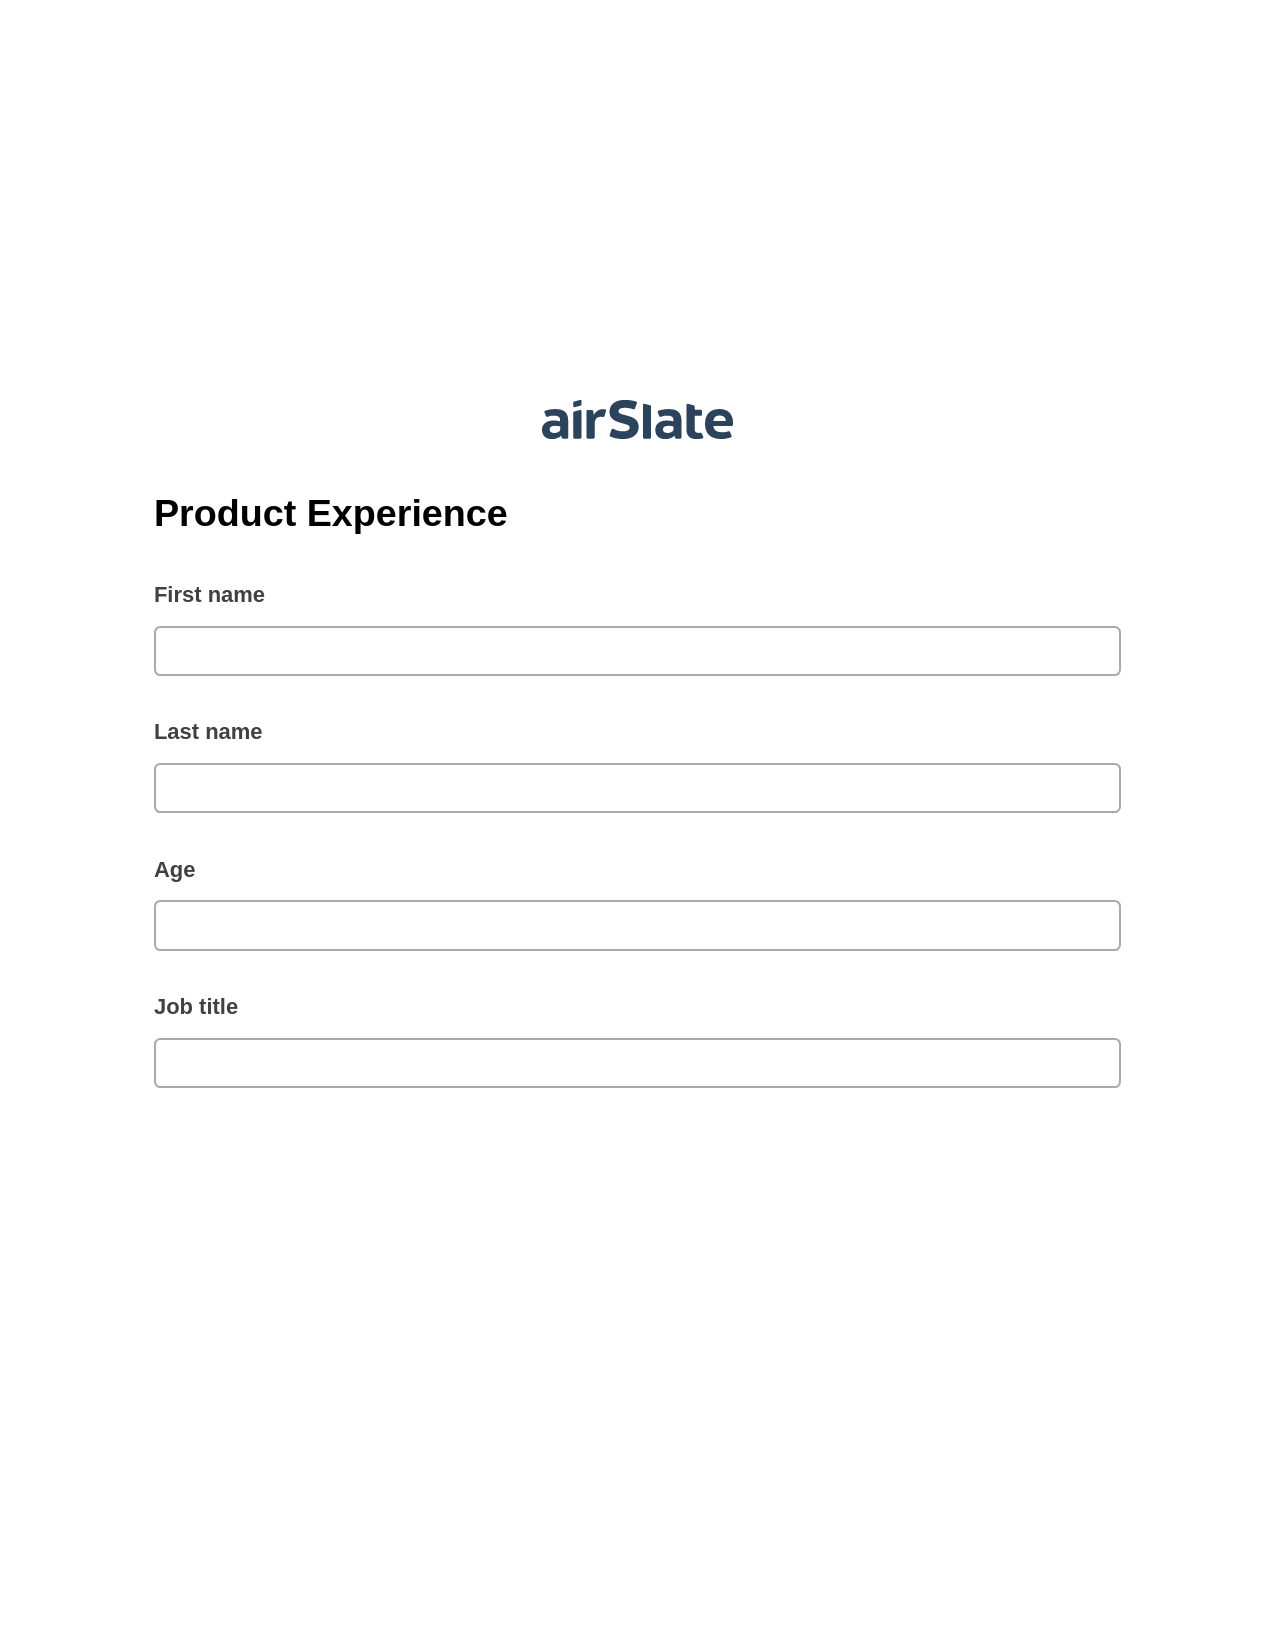 Product Experience Pre-fill from CSV File Bot, Create NetSuite Record bot, Export to Excel 365 Bot